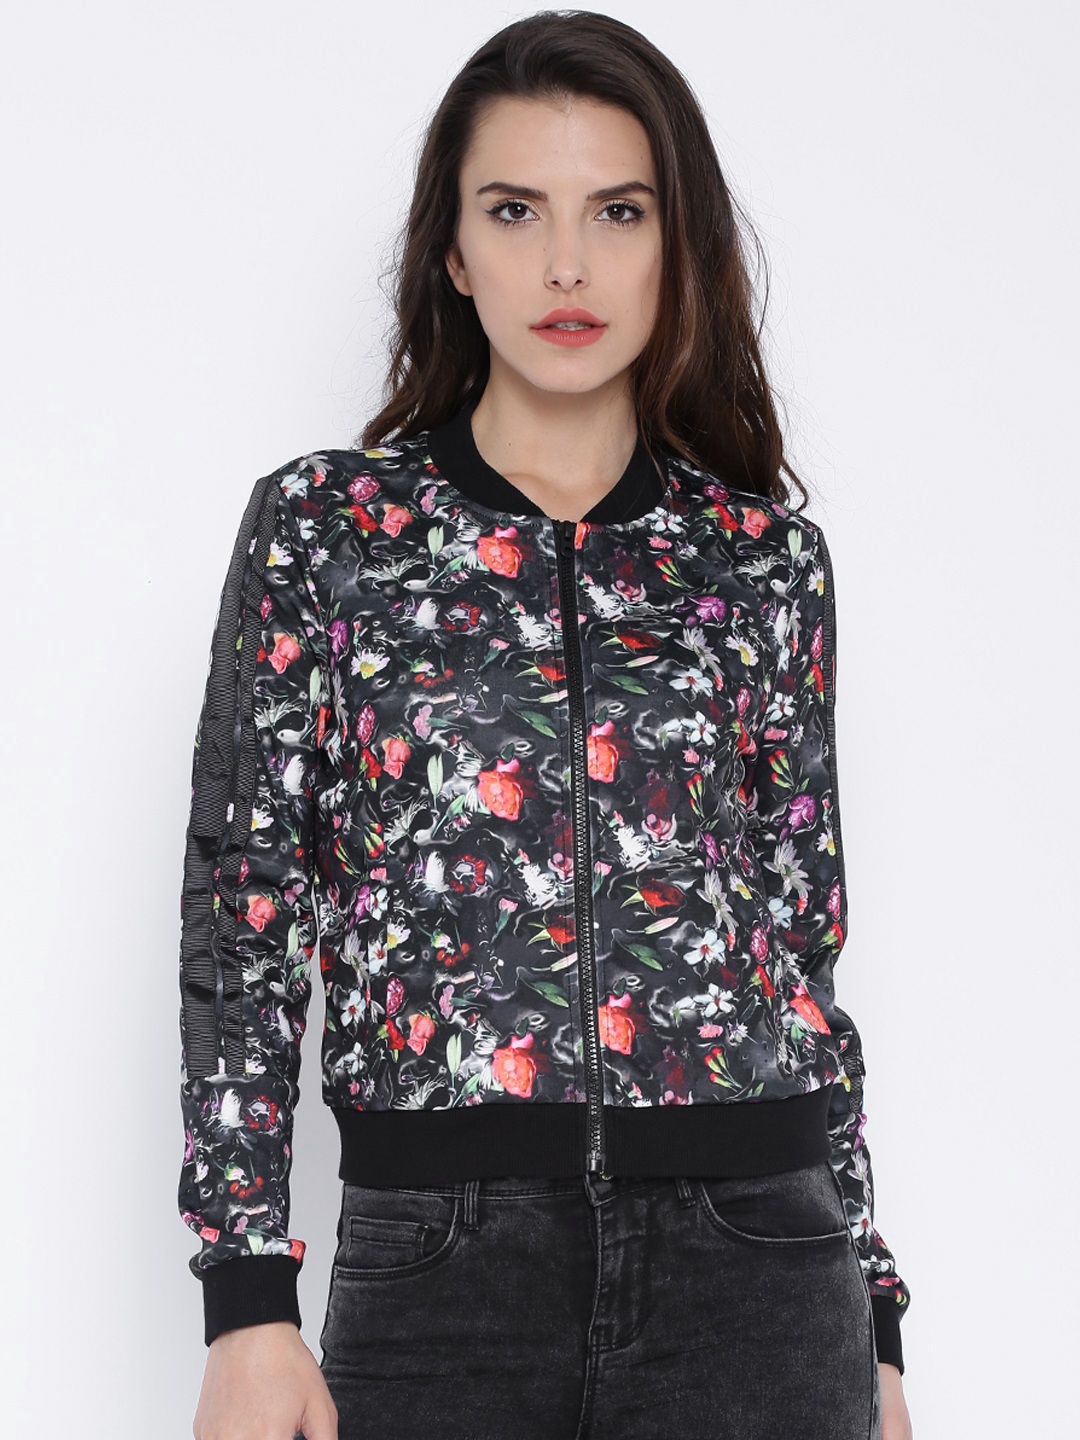 Buy ONLY Black Floral Print Jacket - Jackets for Women 1206455 | Myntra